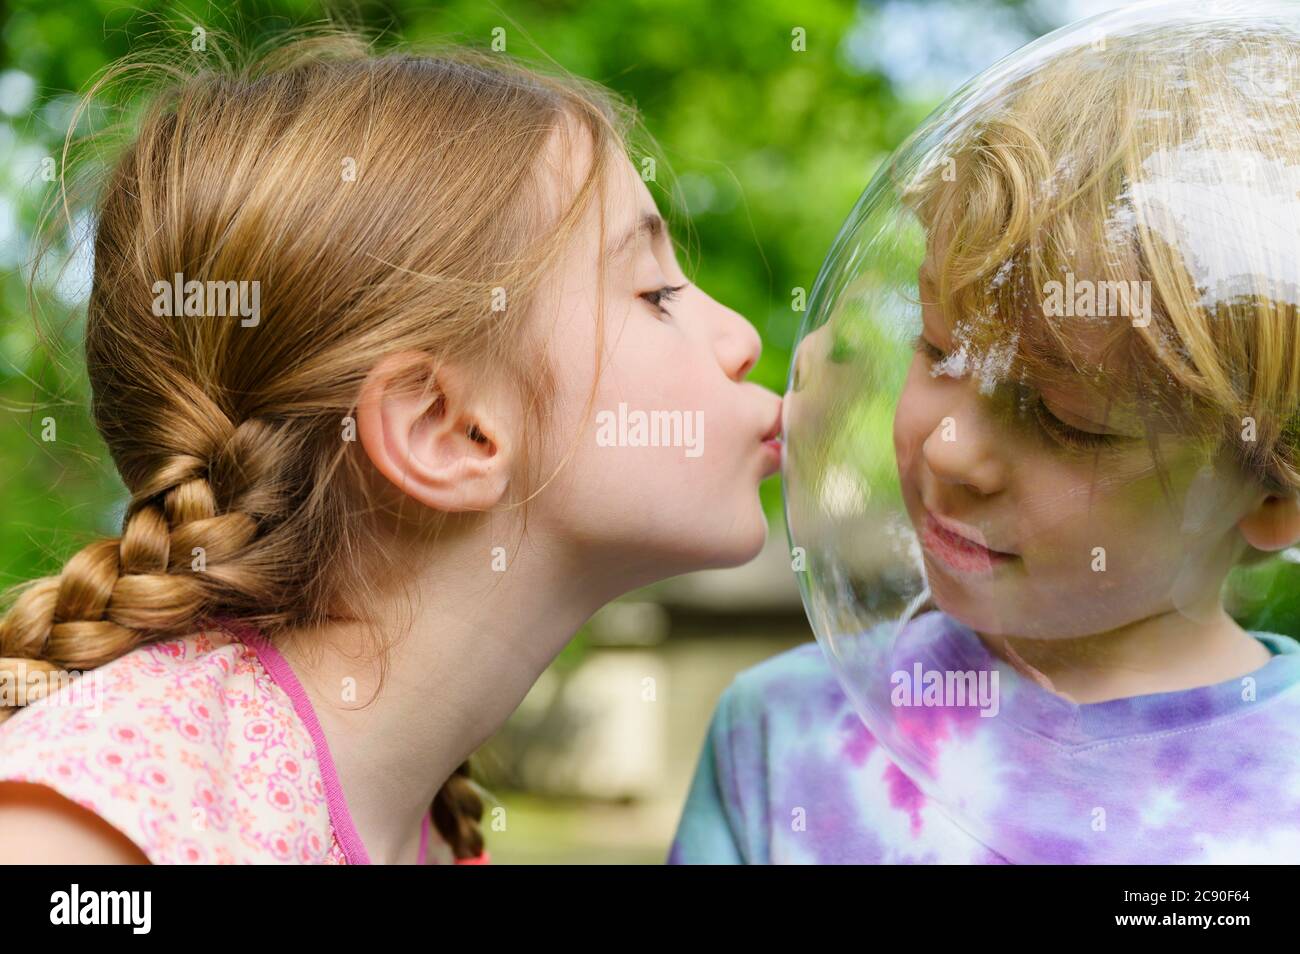 Girl kissing boy wearing bubble to socially distance Stock Photo